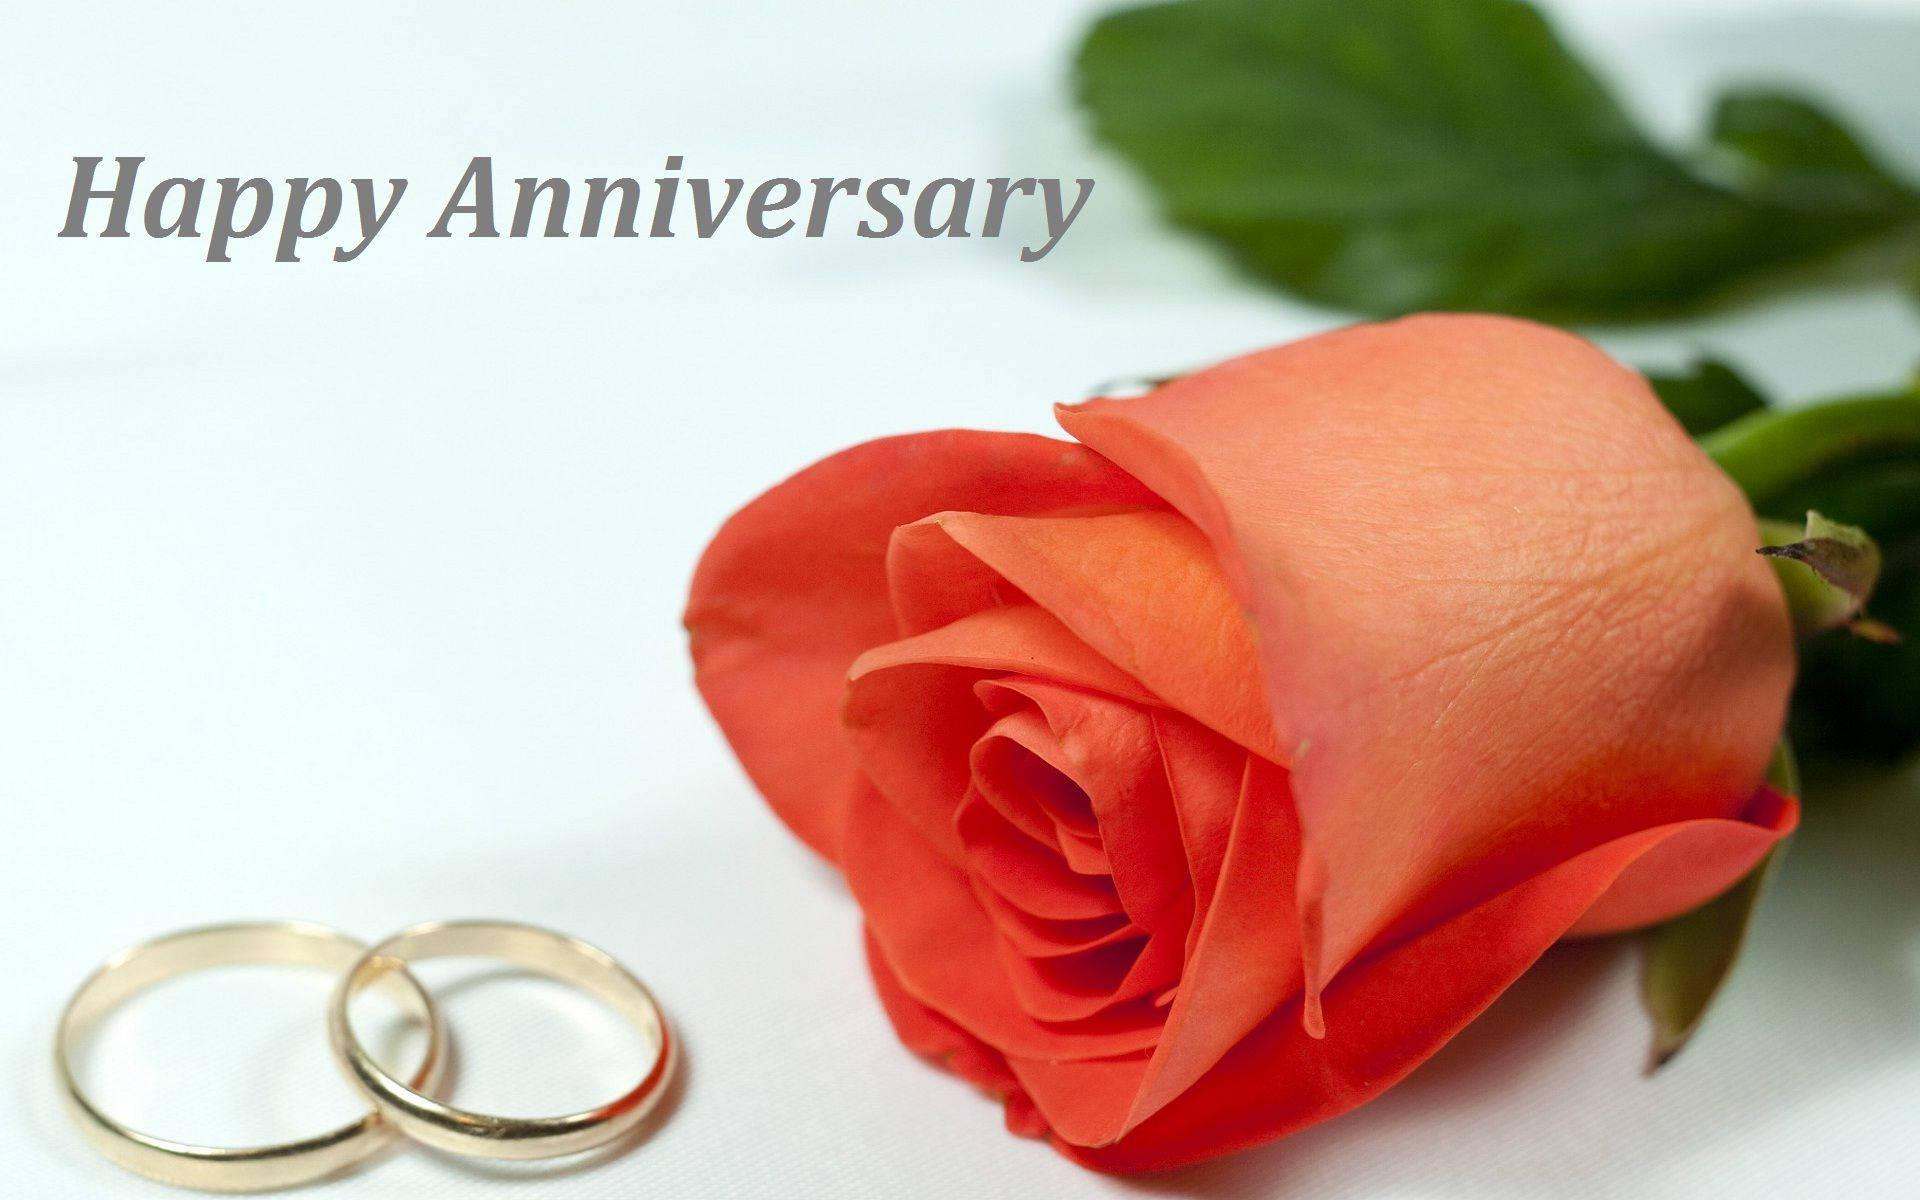 Happy Anniversary With Rings And Rose Background